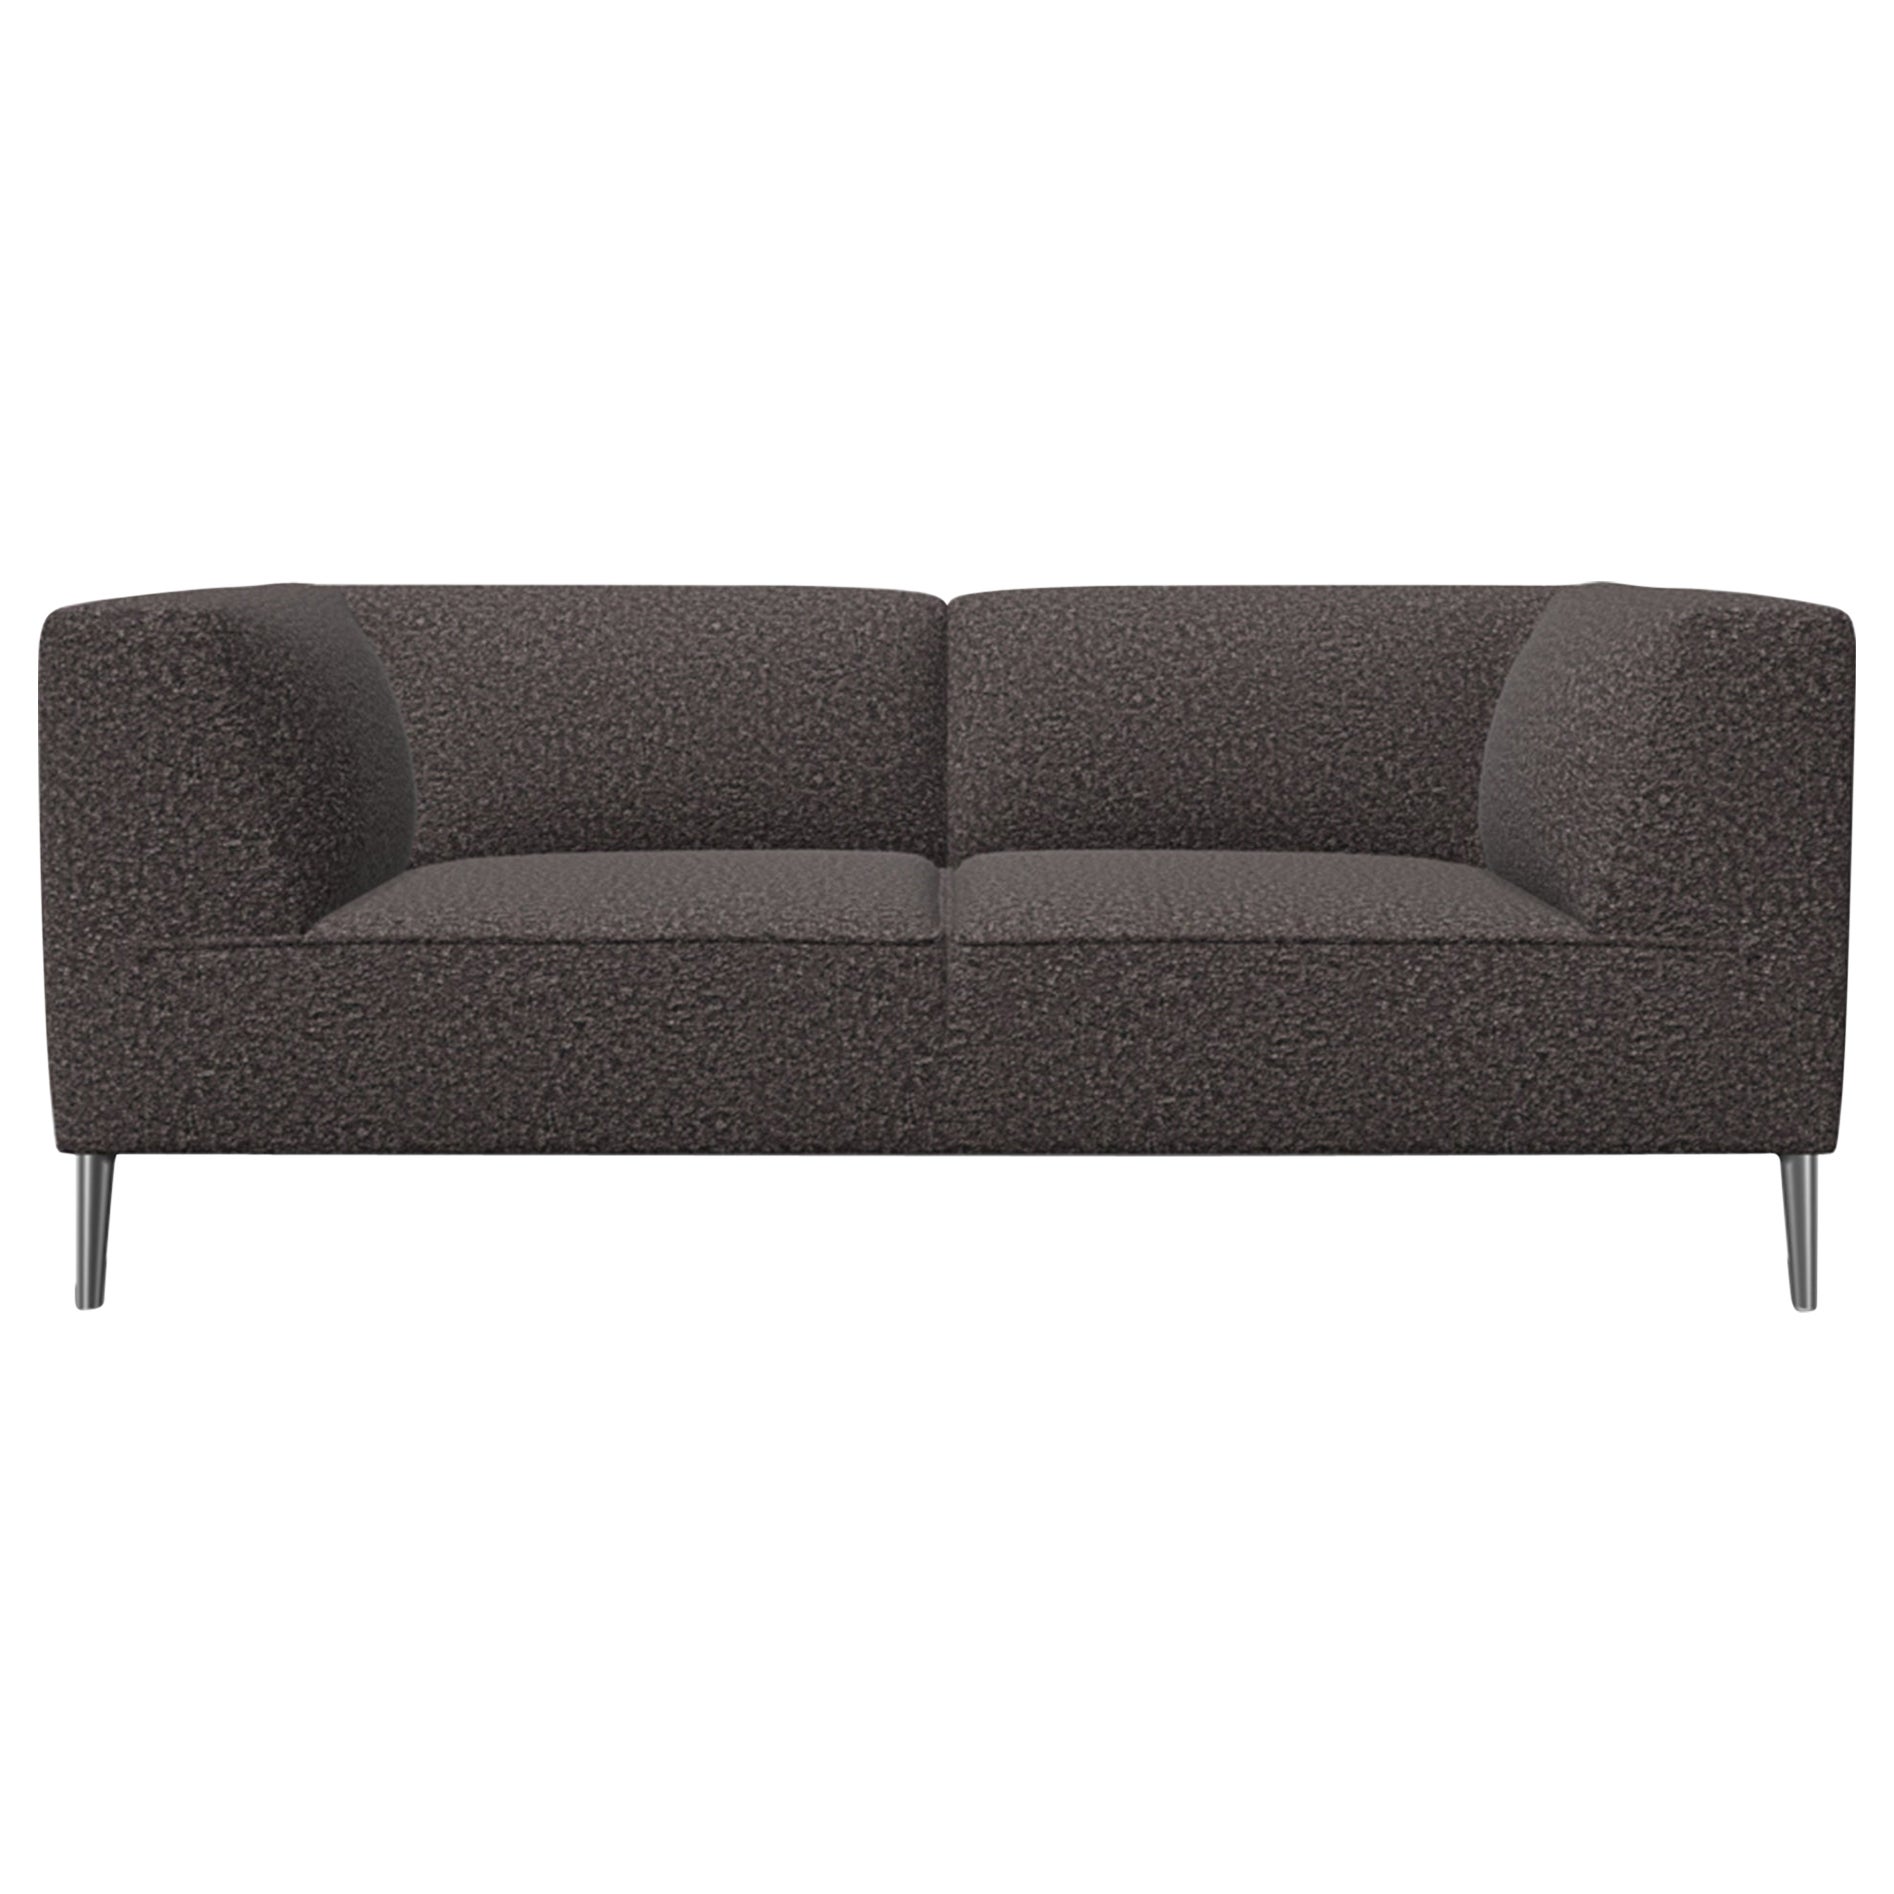 Moooi Double Seat Sofa So Good in Divina MD Upholstery & Polished Aluminum Feet For Sale